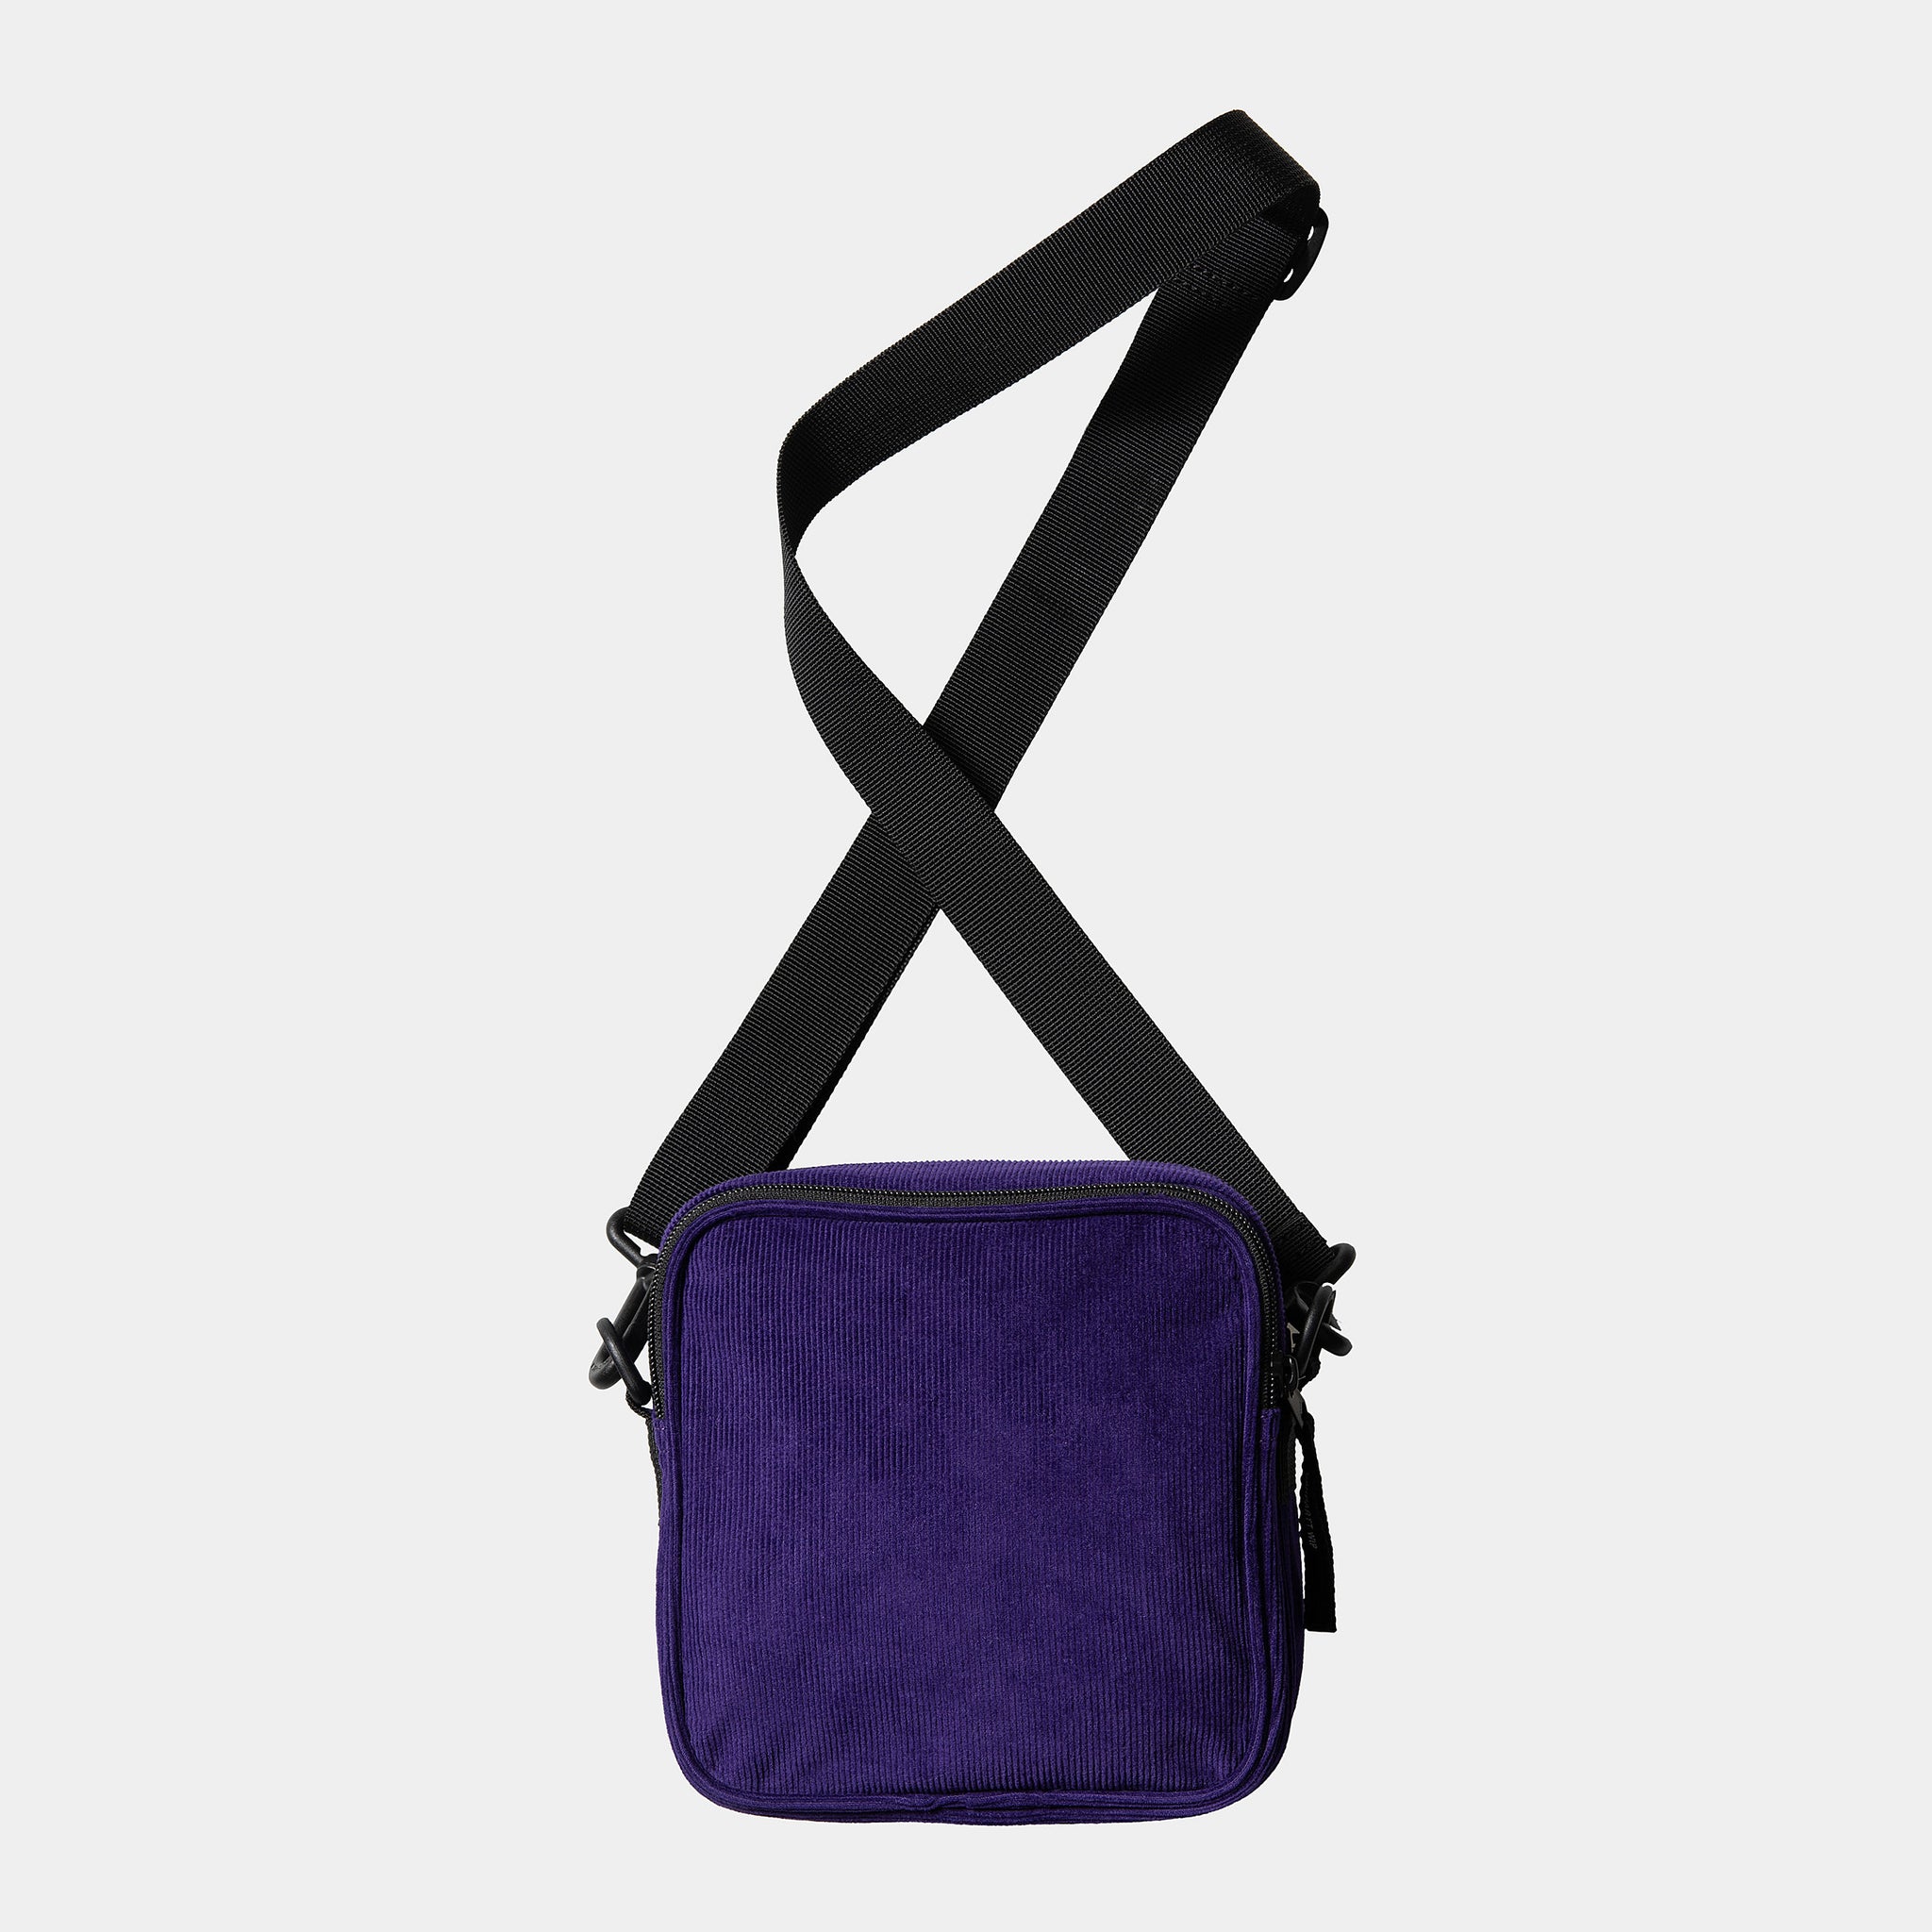 Essentials Cord Bag, Small (Tyrian)